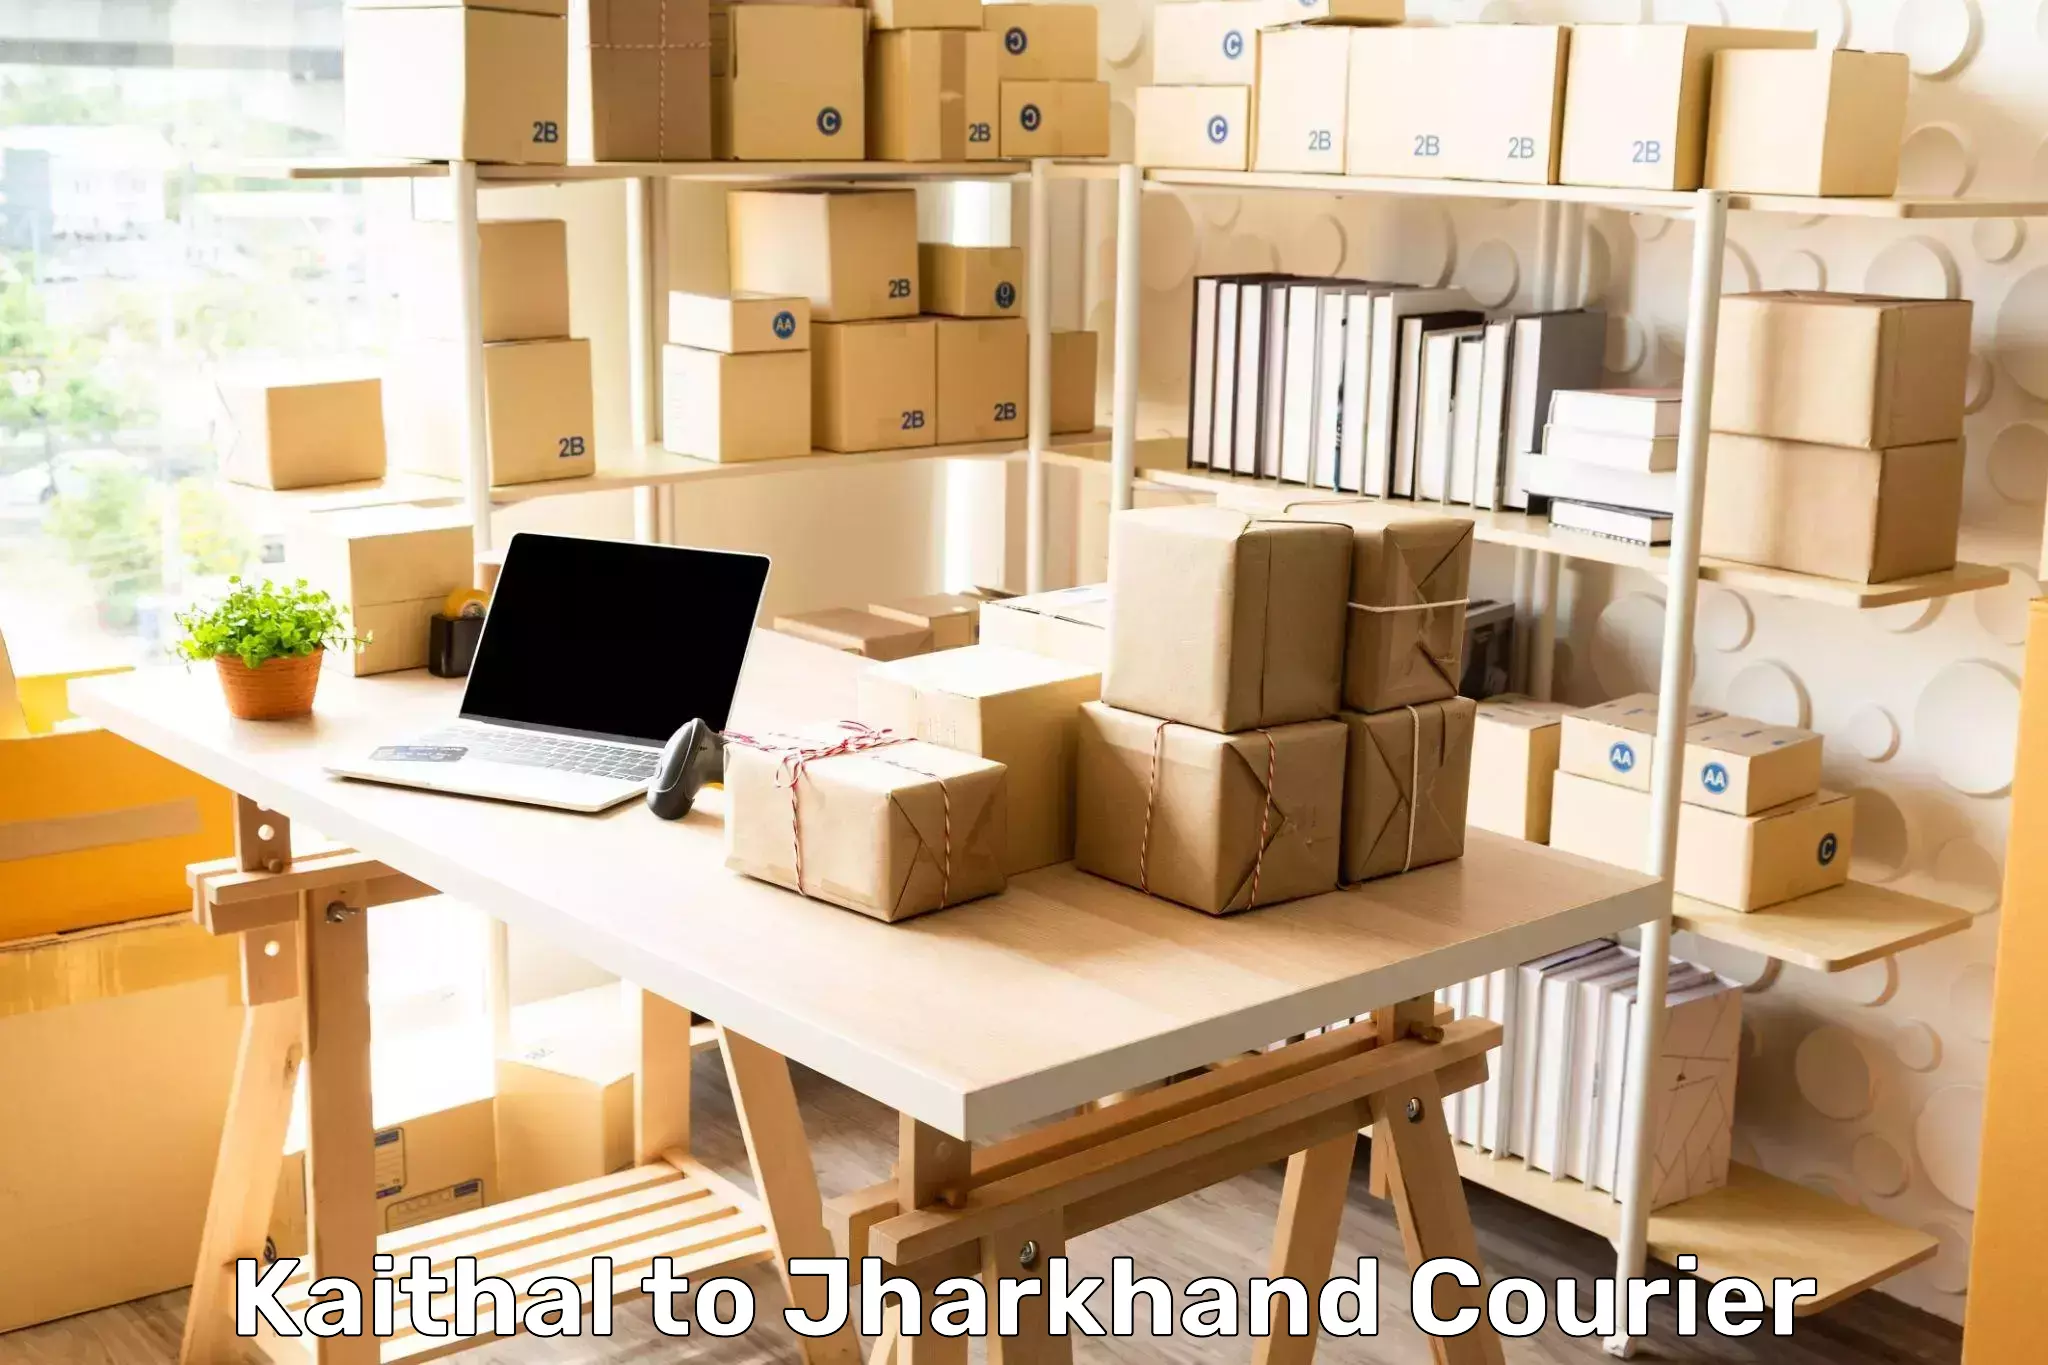 Advanced shipping technology Kaithal to Jharkhand